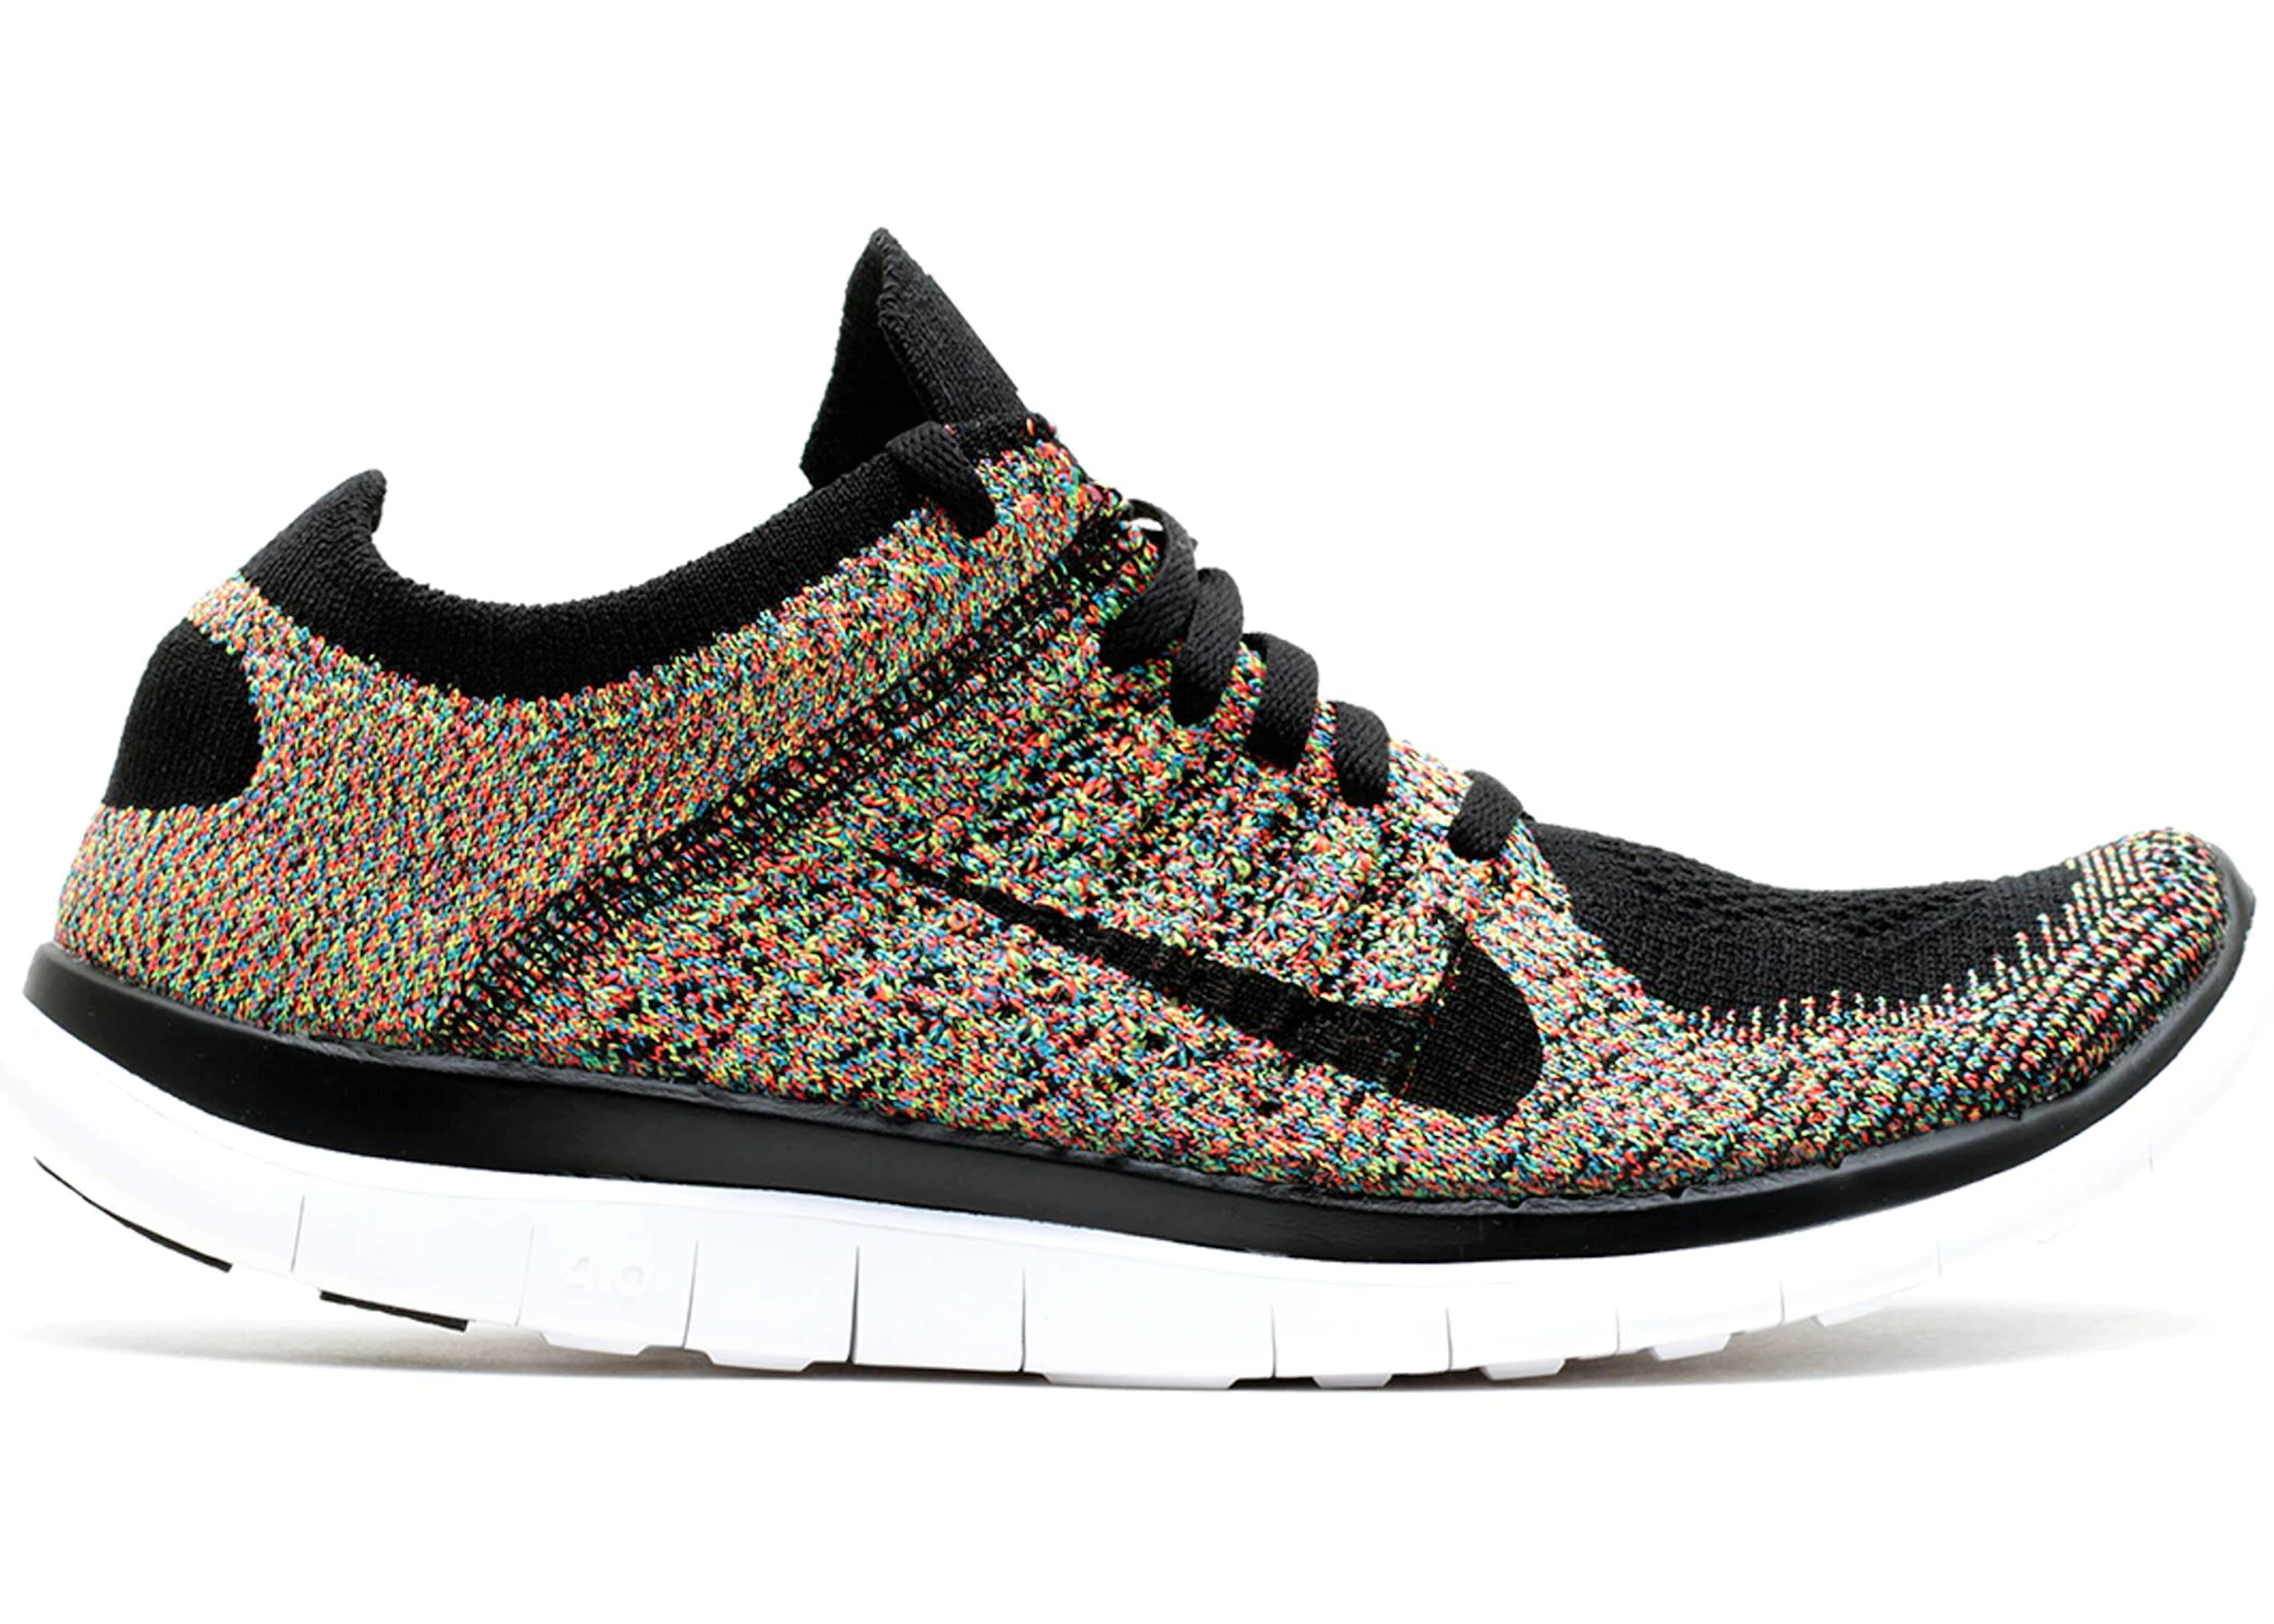 bronce fusible donante Nike Free Flyknit 4.0 Multi-Color - 631053-004 - ES